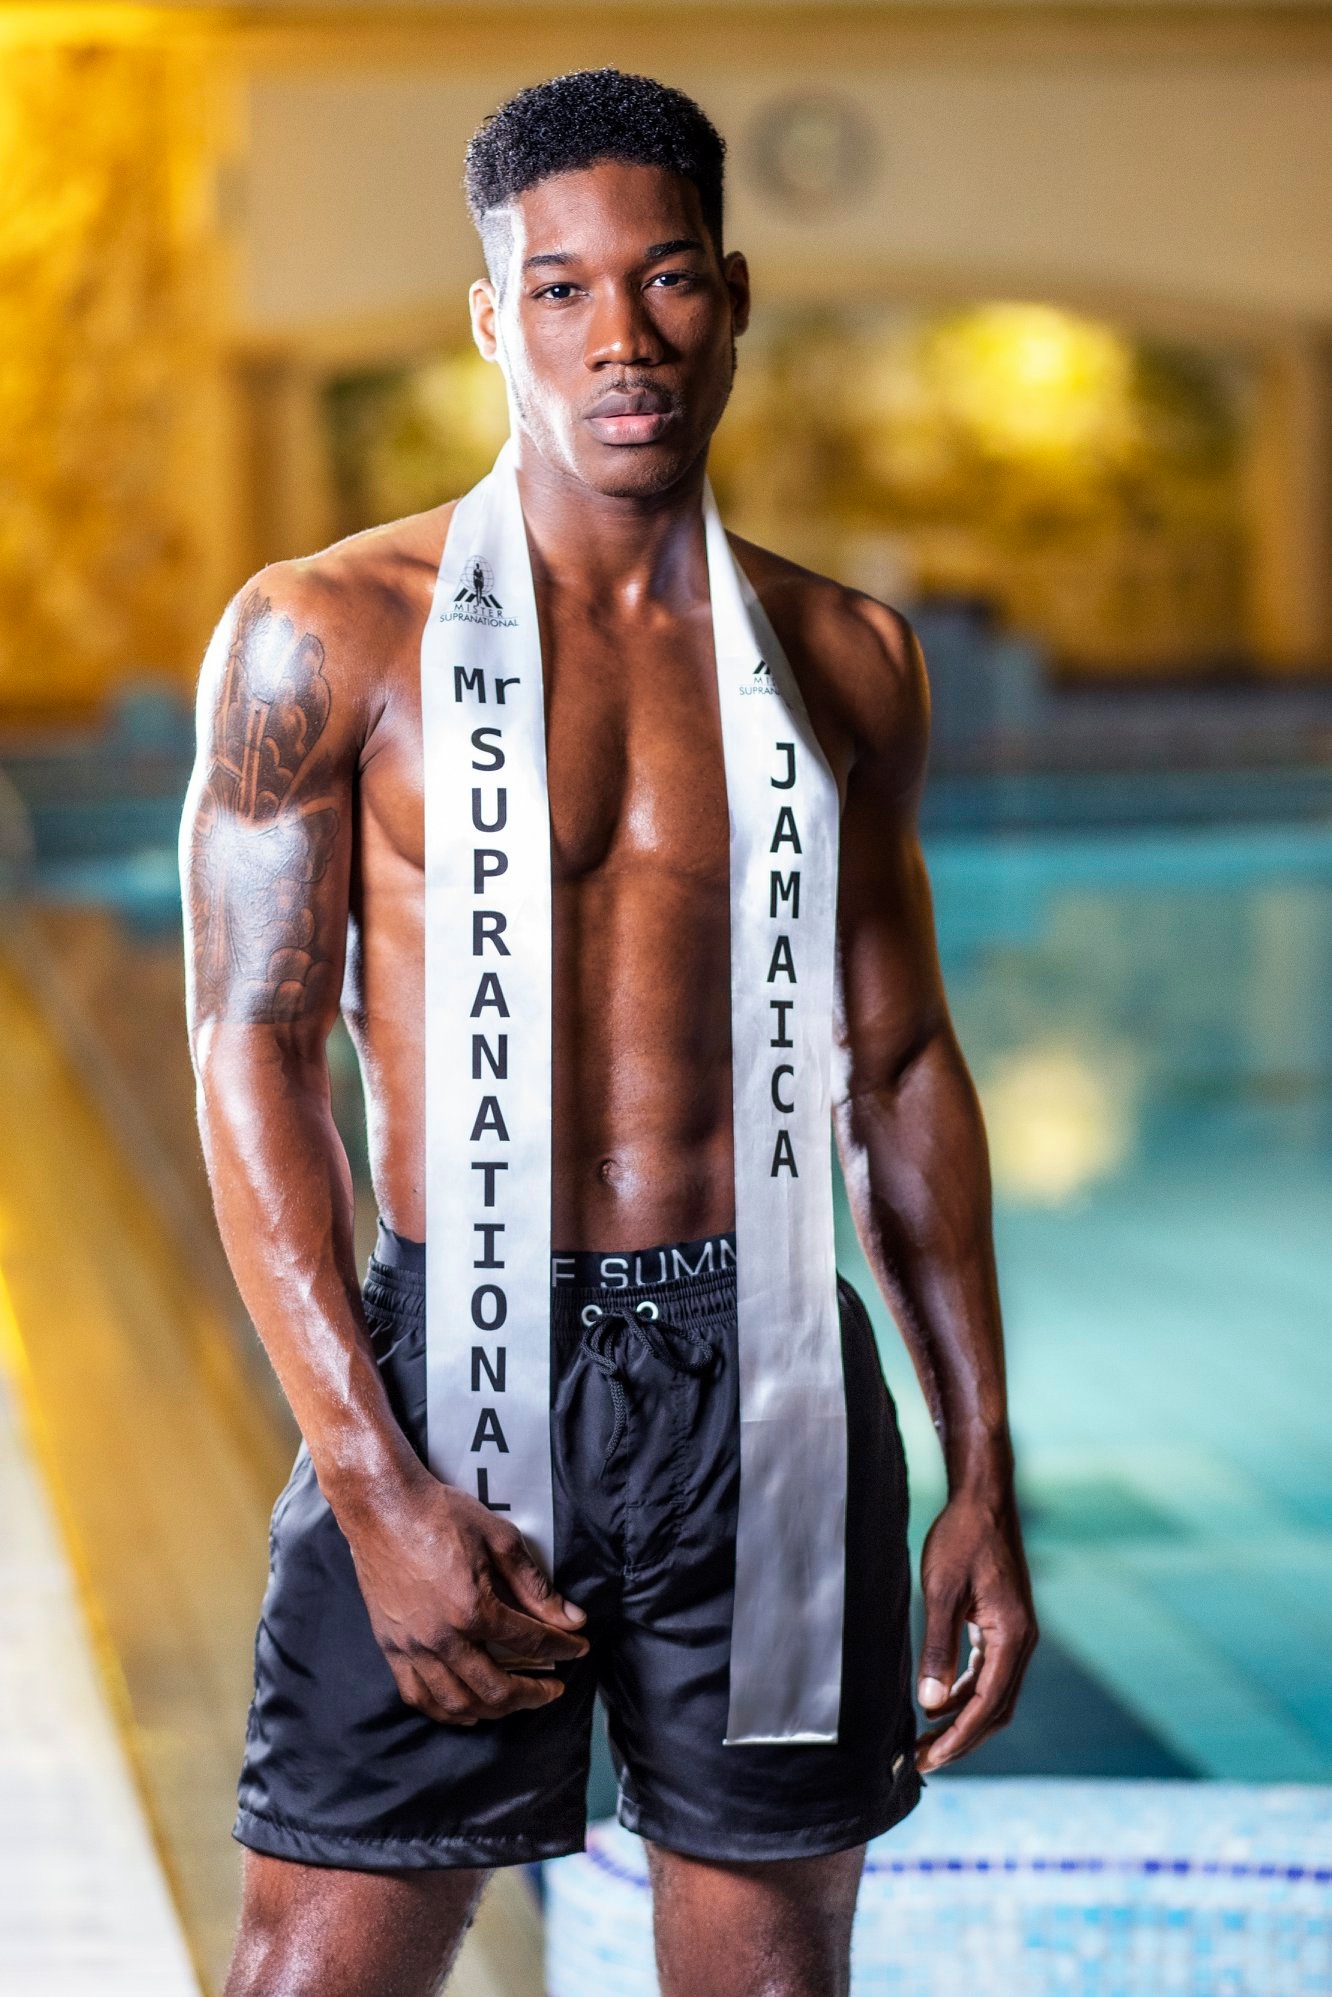 Mister Supranational 2019 Official Swimwear 315